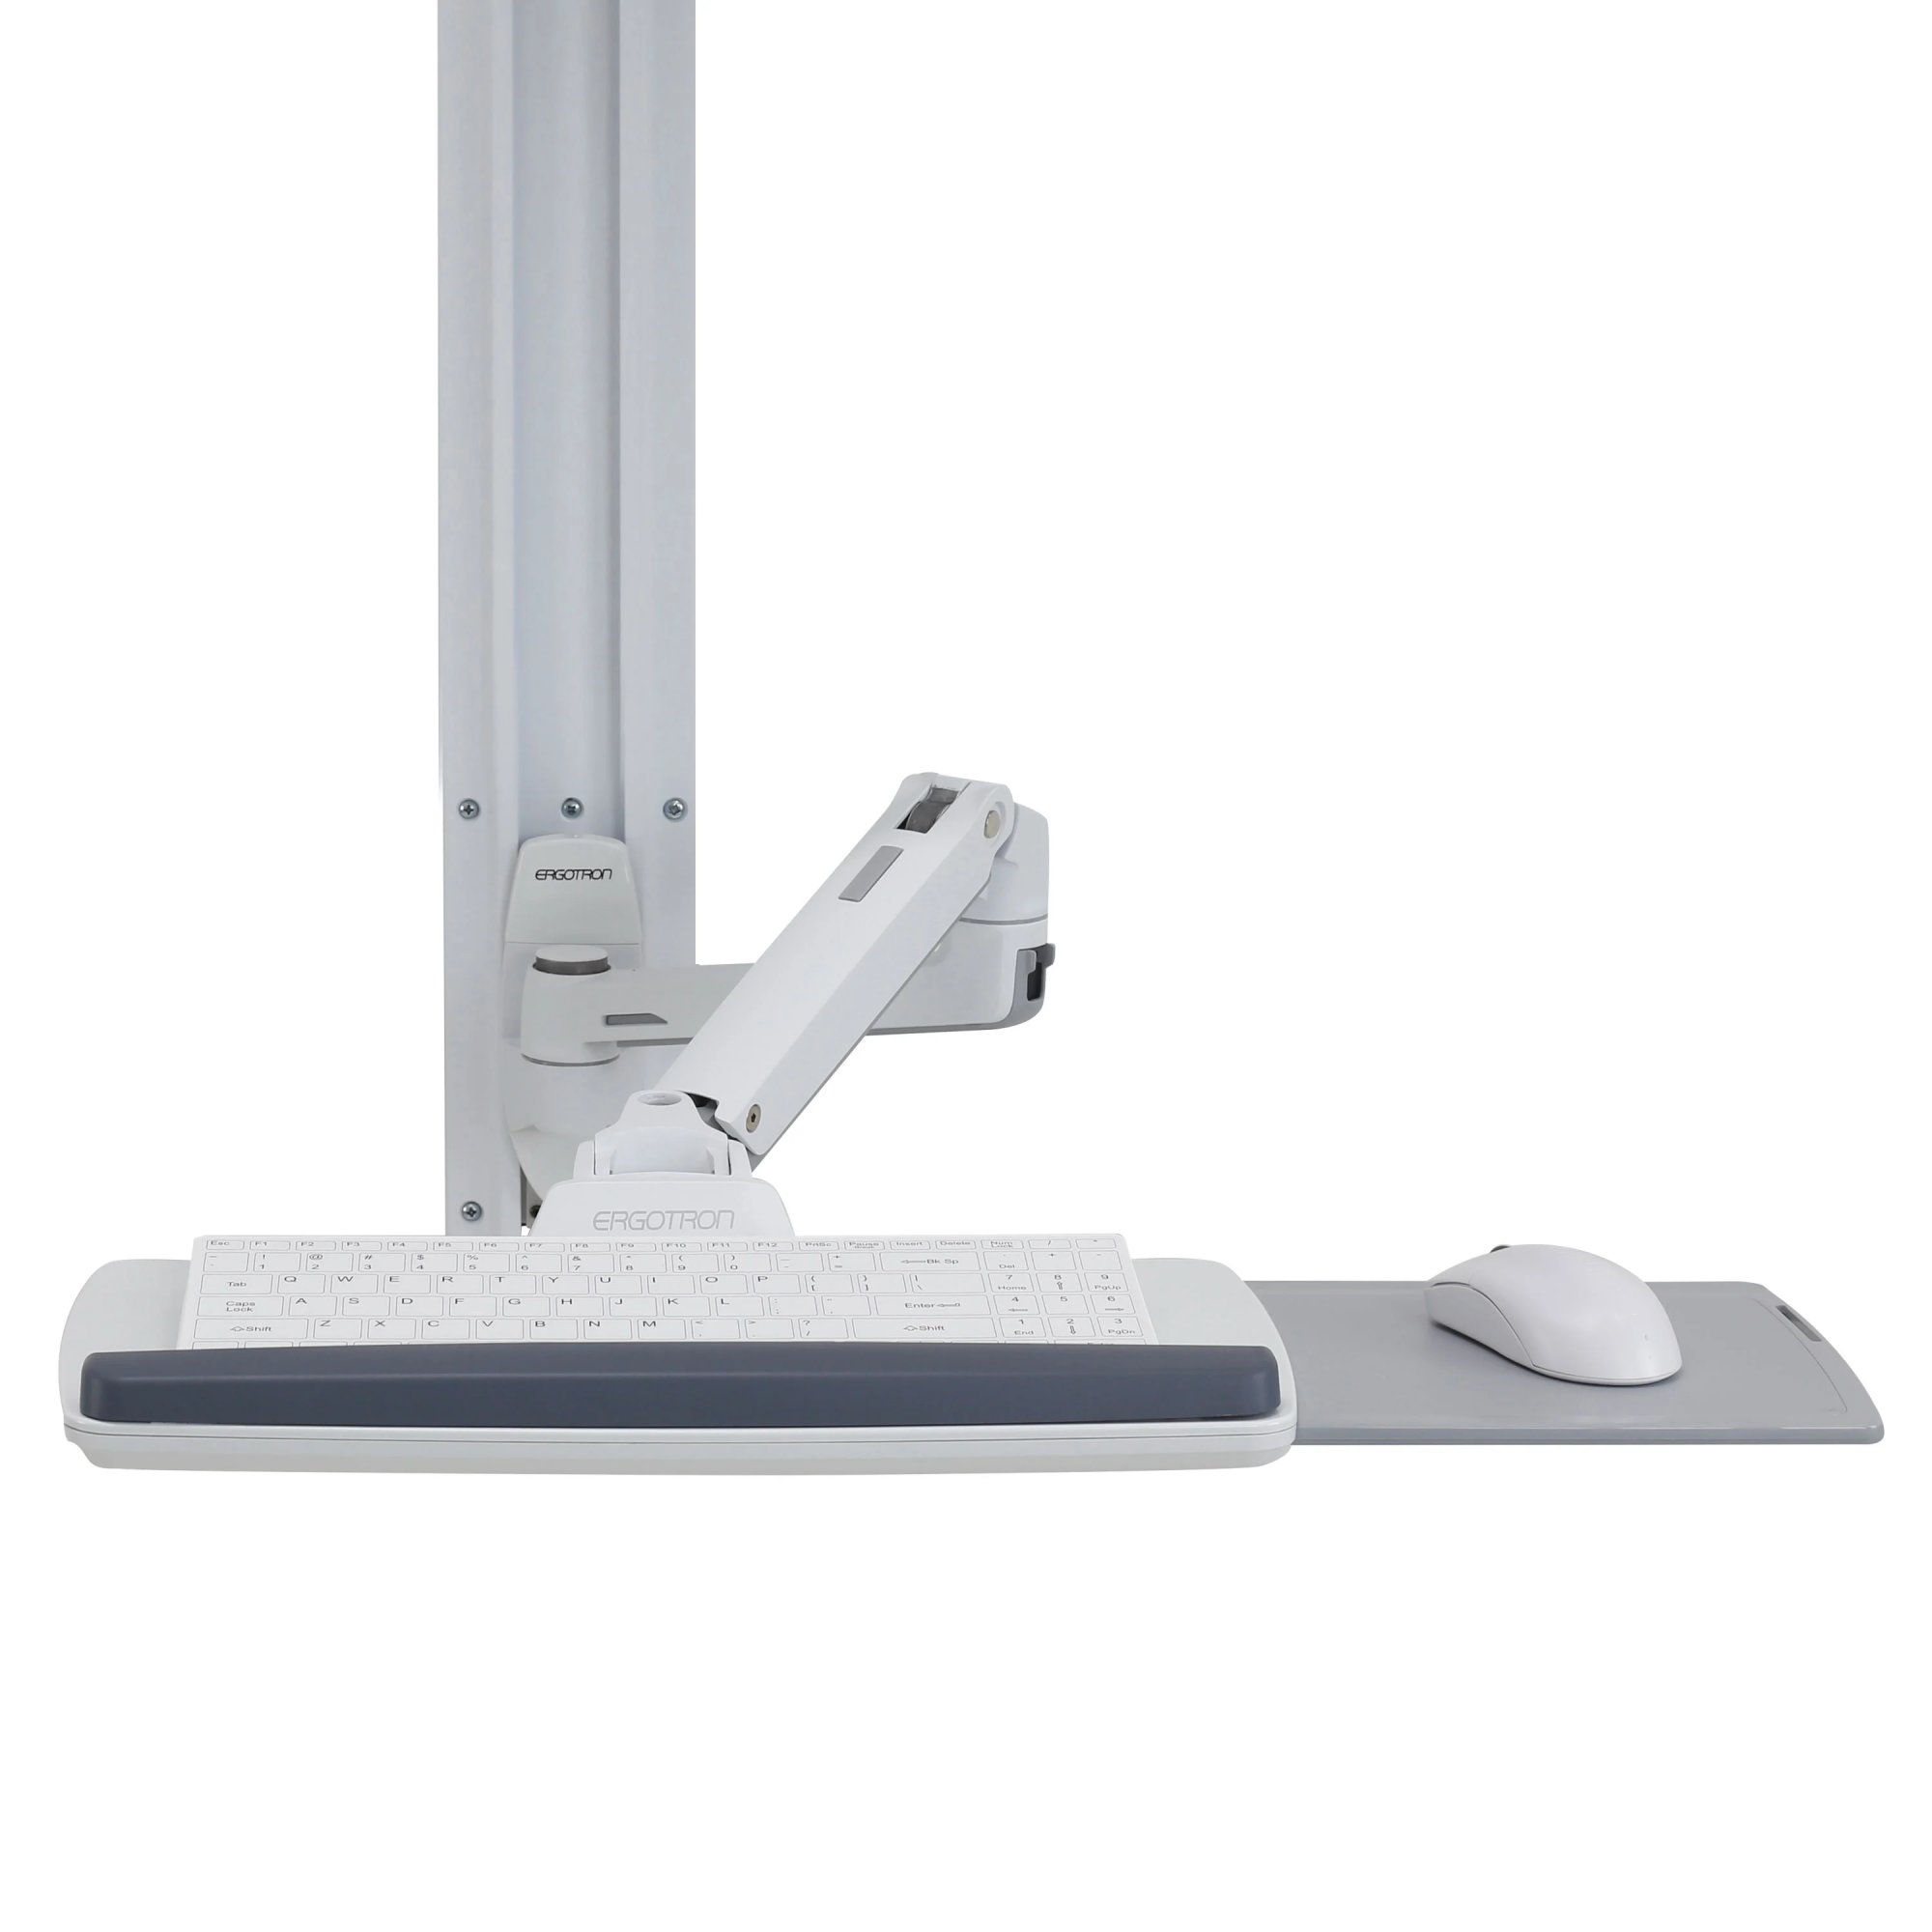 Ergotron 45-551-216 LX Wall Mount System without CPU Holder (white)